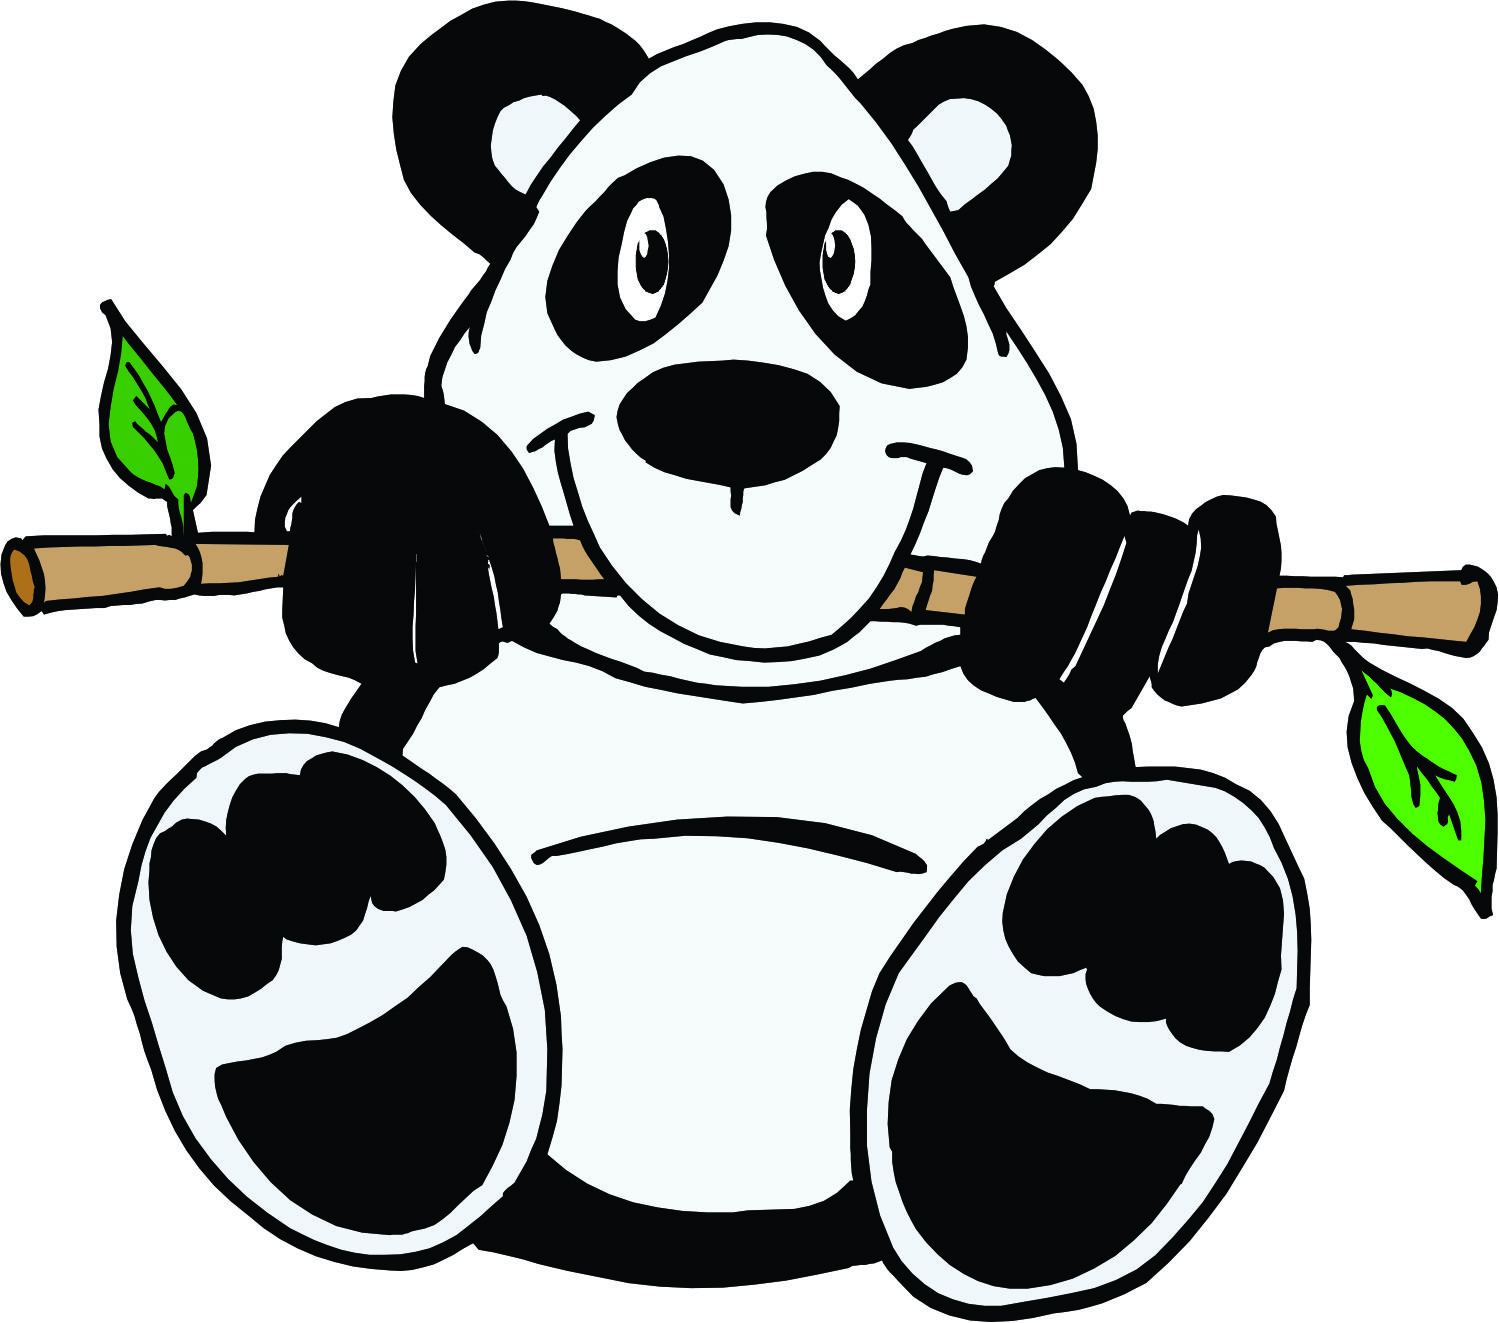 Free Panda Pictures Graphics Illustrations 3 Clipart